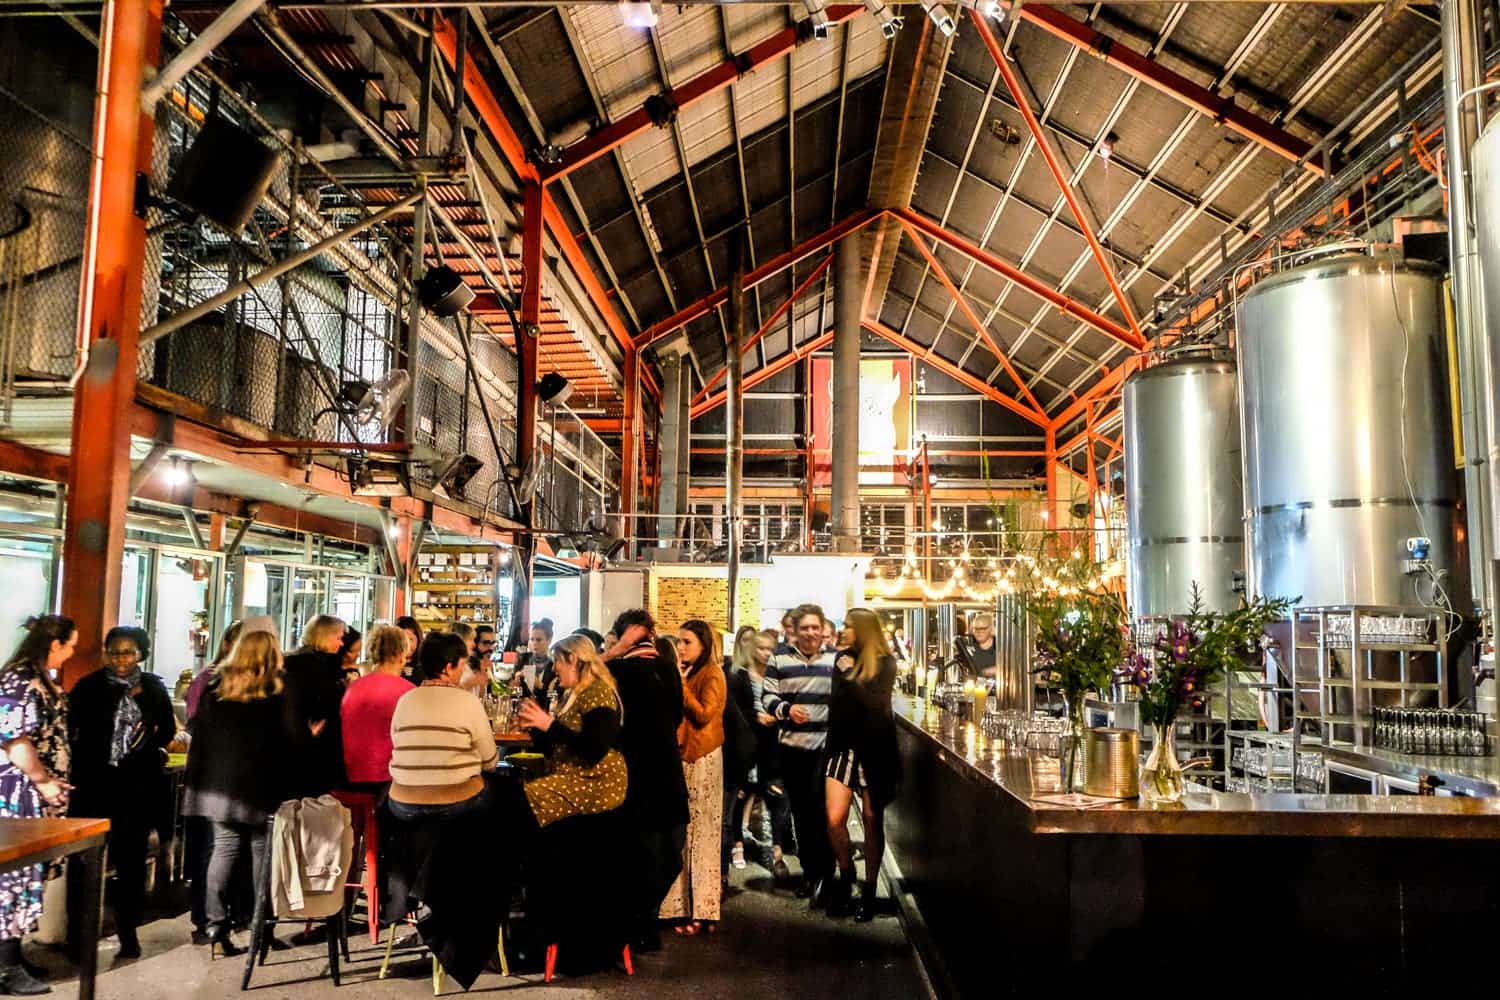 The open beer cellar design of the Little Creatures Brewery in Freemantle, Perth, Australia